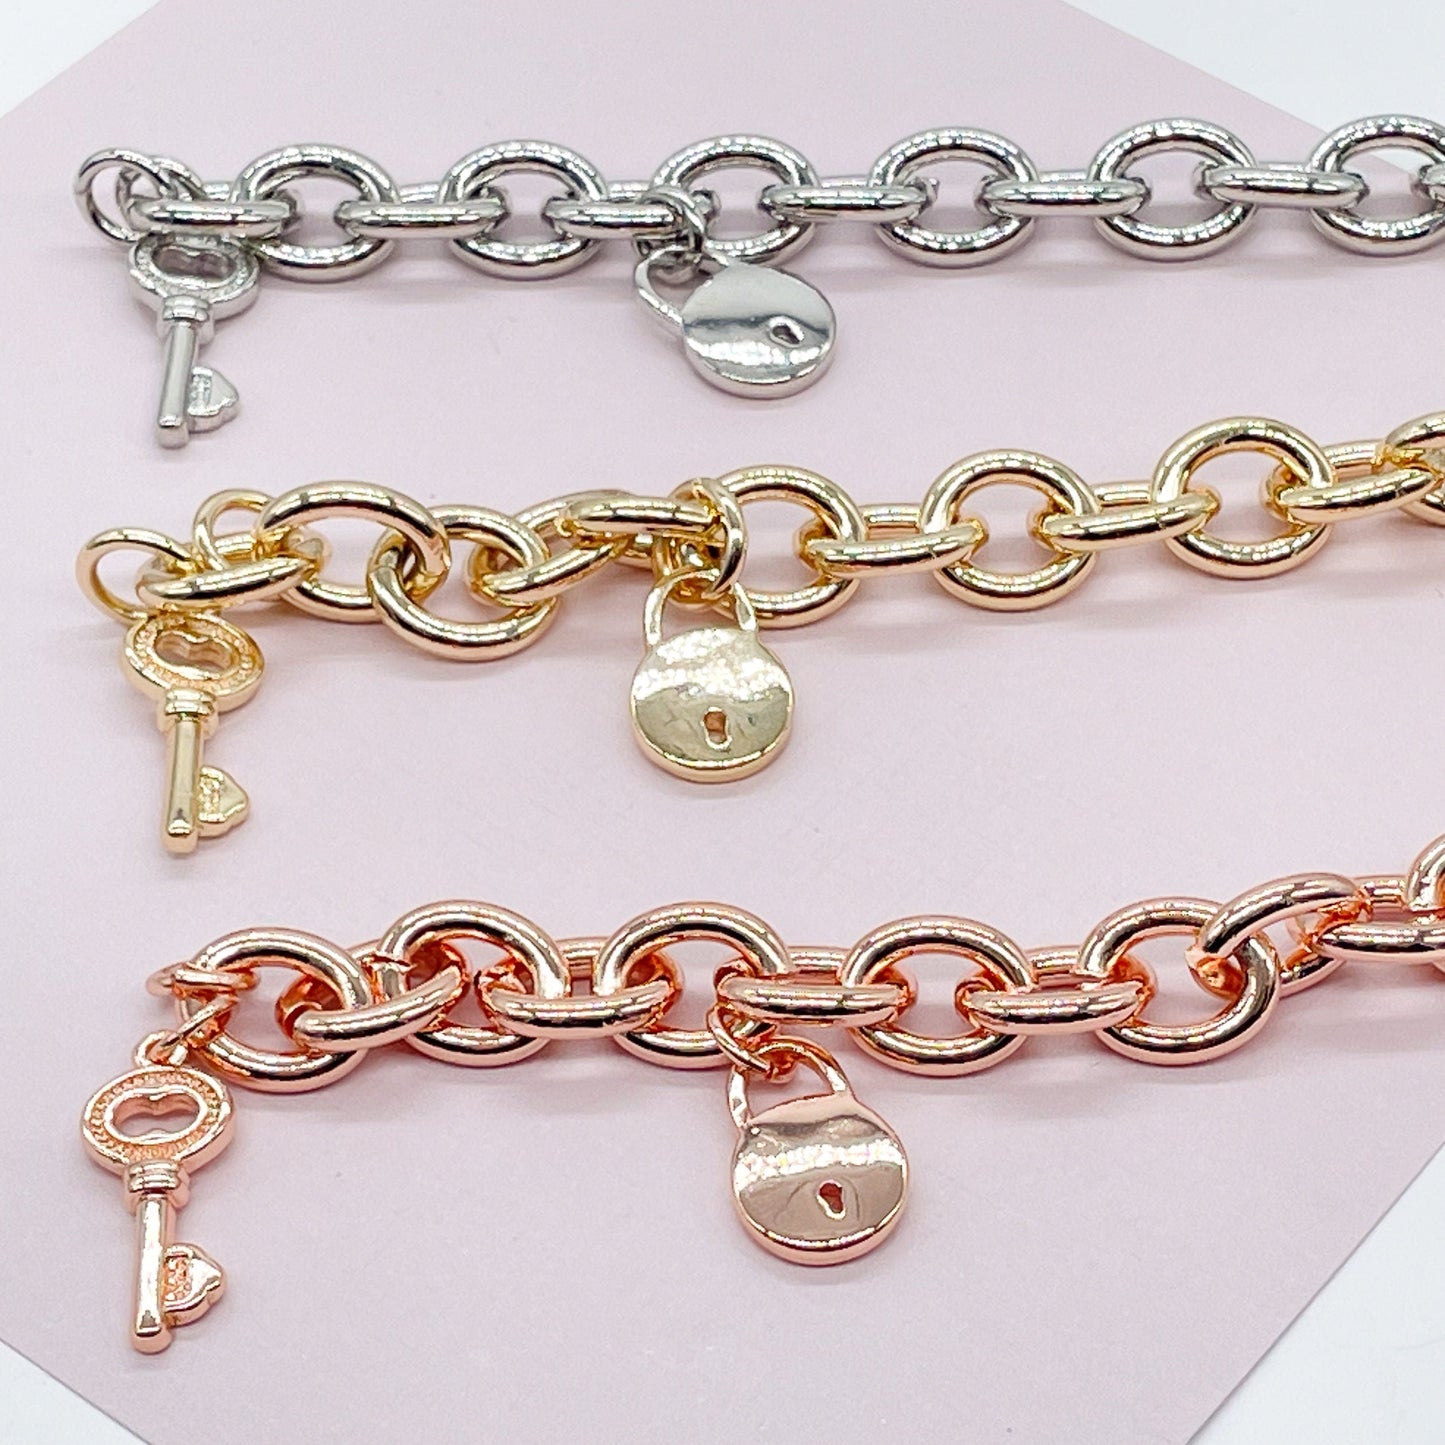 Chunky 18k Gold Layered Lock Heart And Key Bracelet Available in Gold, Rose